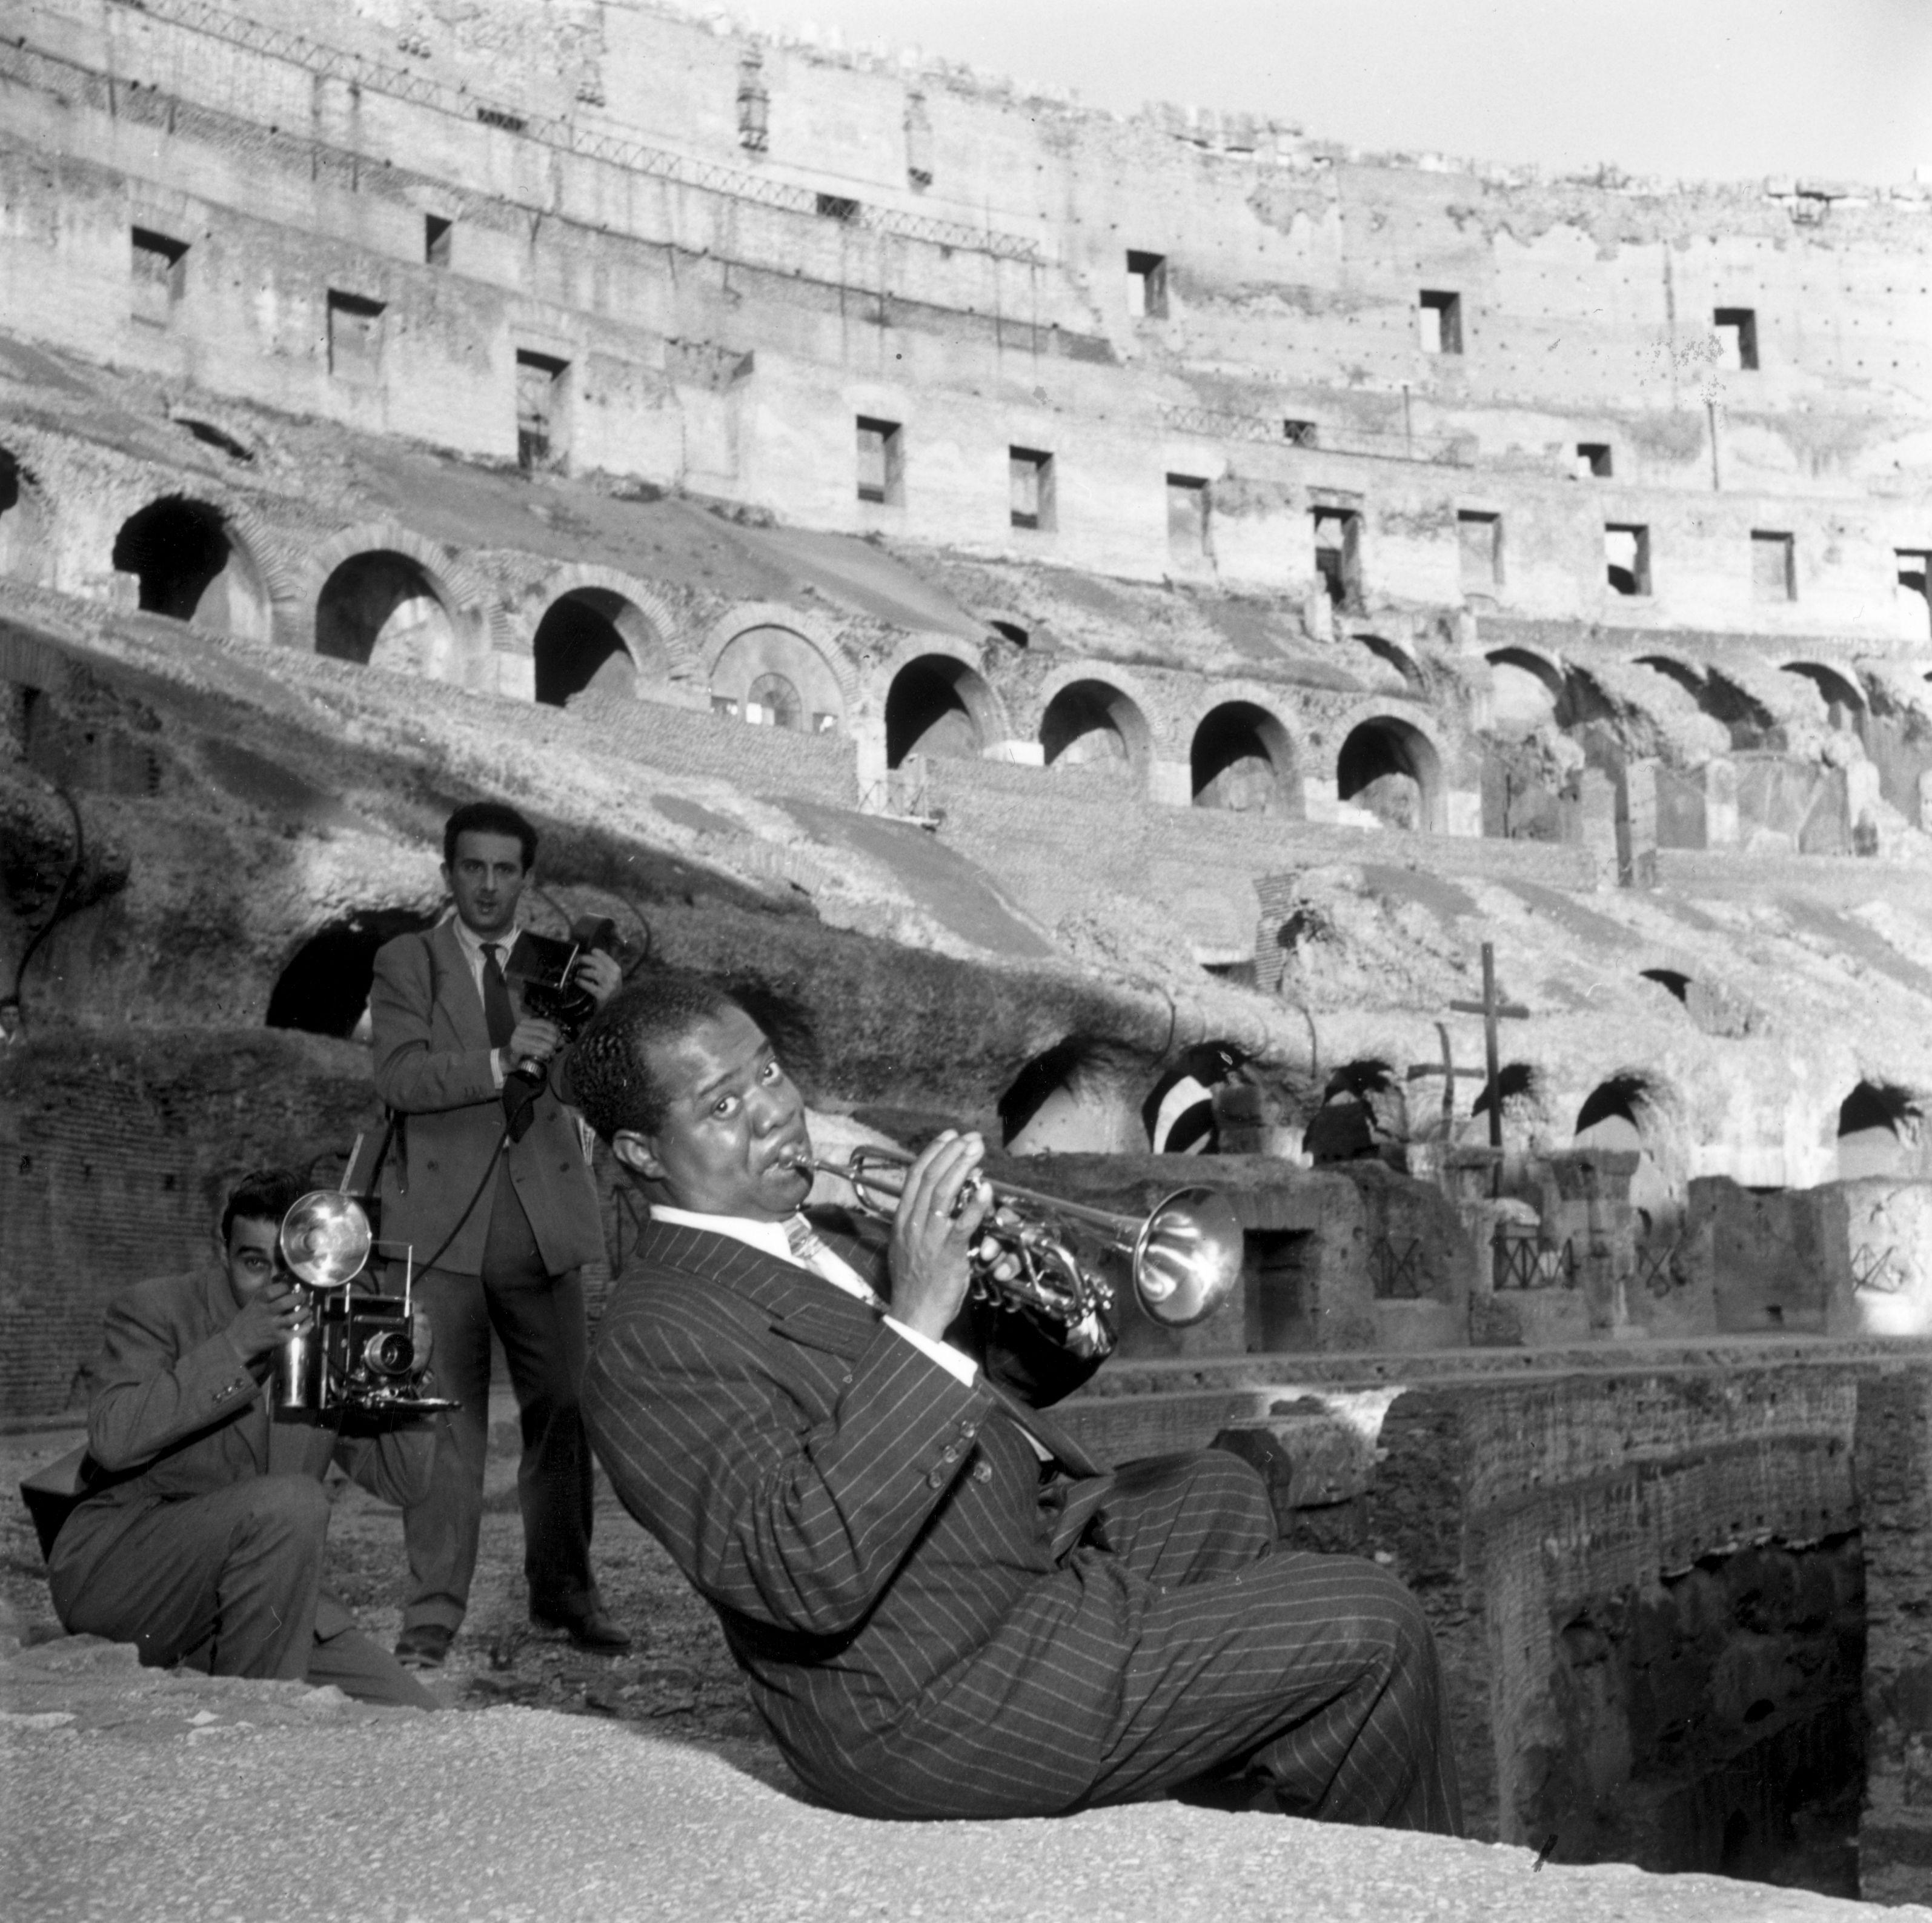 Slim Aarons Black and White Photograph - The King of Jazz, Louis Armstrong in 1940s Rome, Black and White Estate Edition